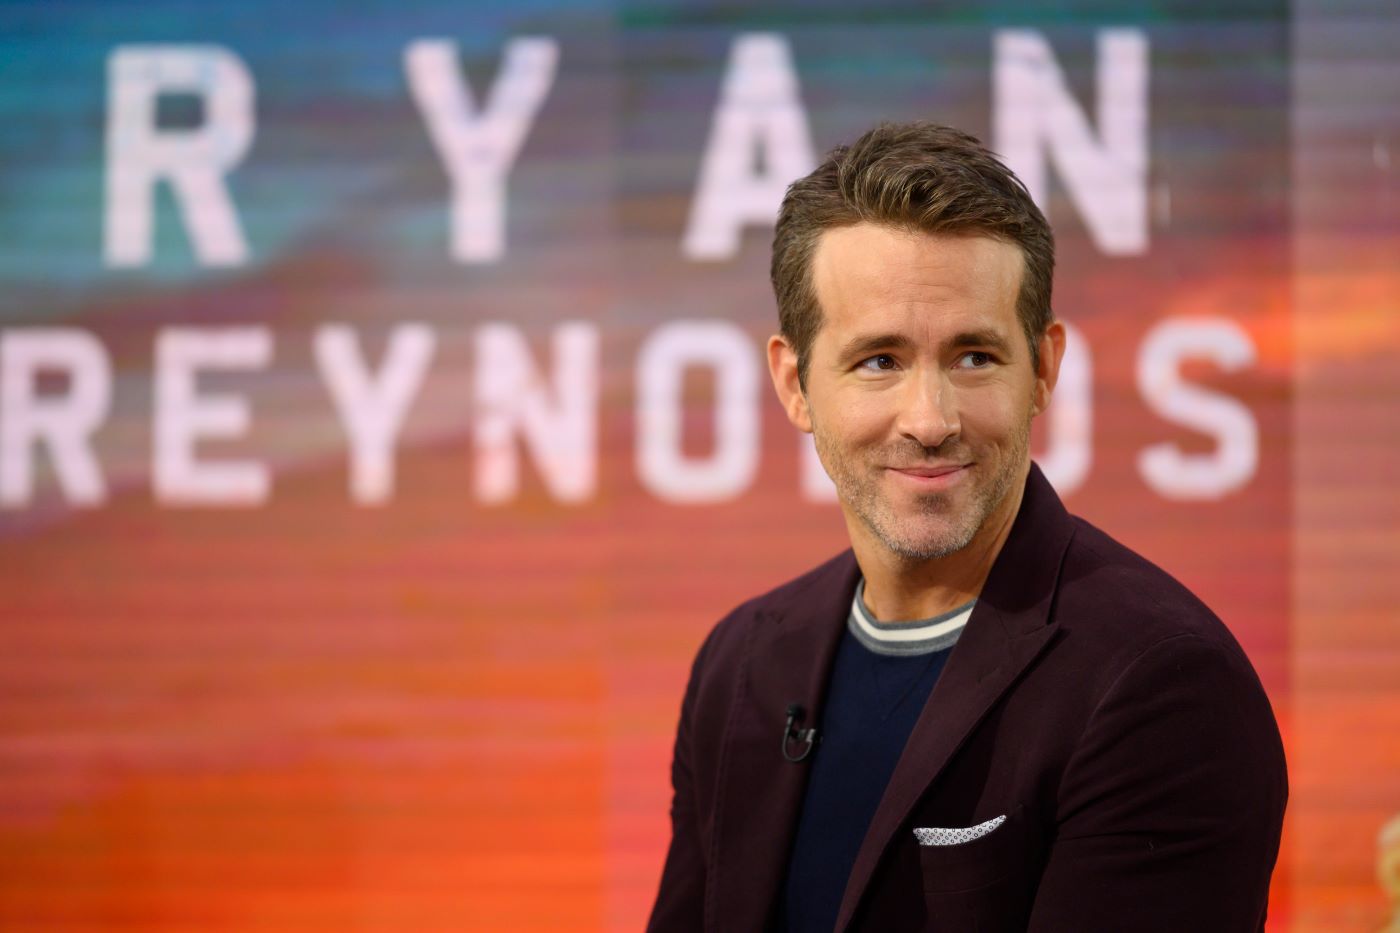 Ryan Reynolds dressed in a black t-shirt with a maroon color jacket standing in front of a red and blue background with his name written in white behind him.